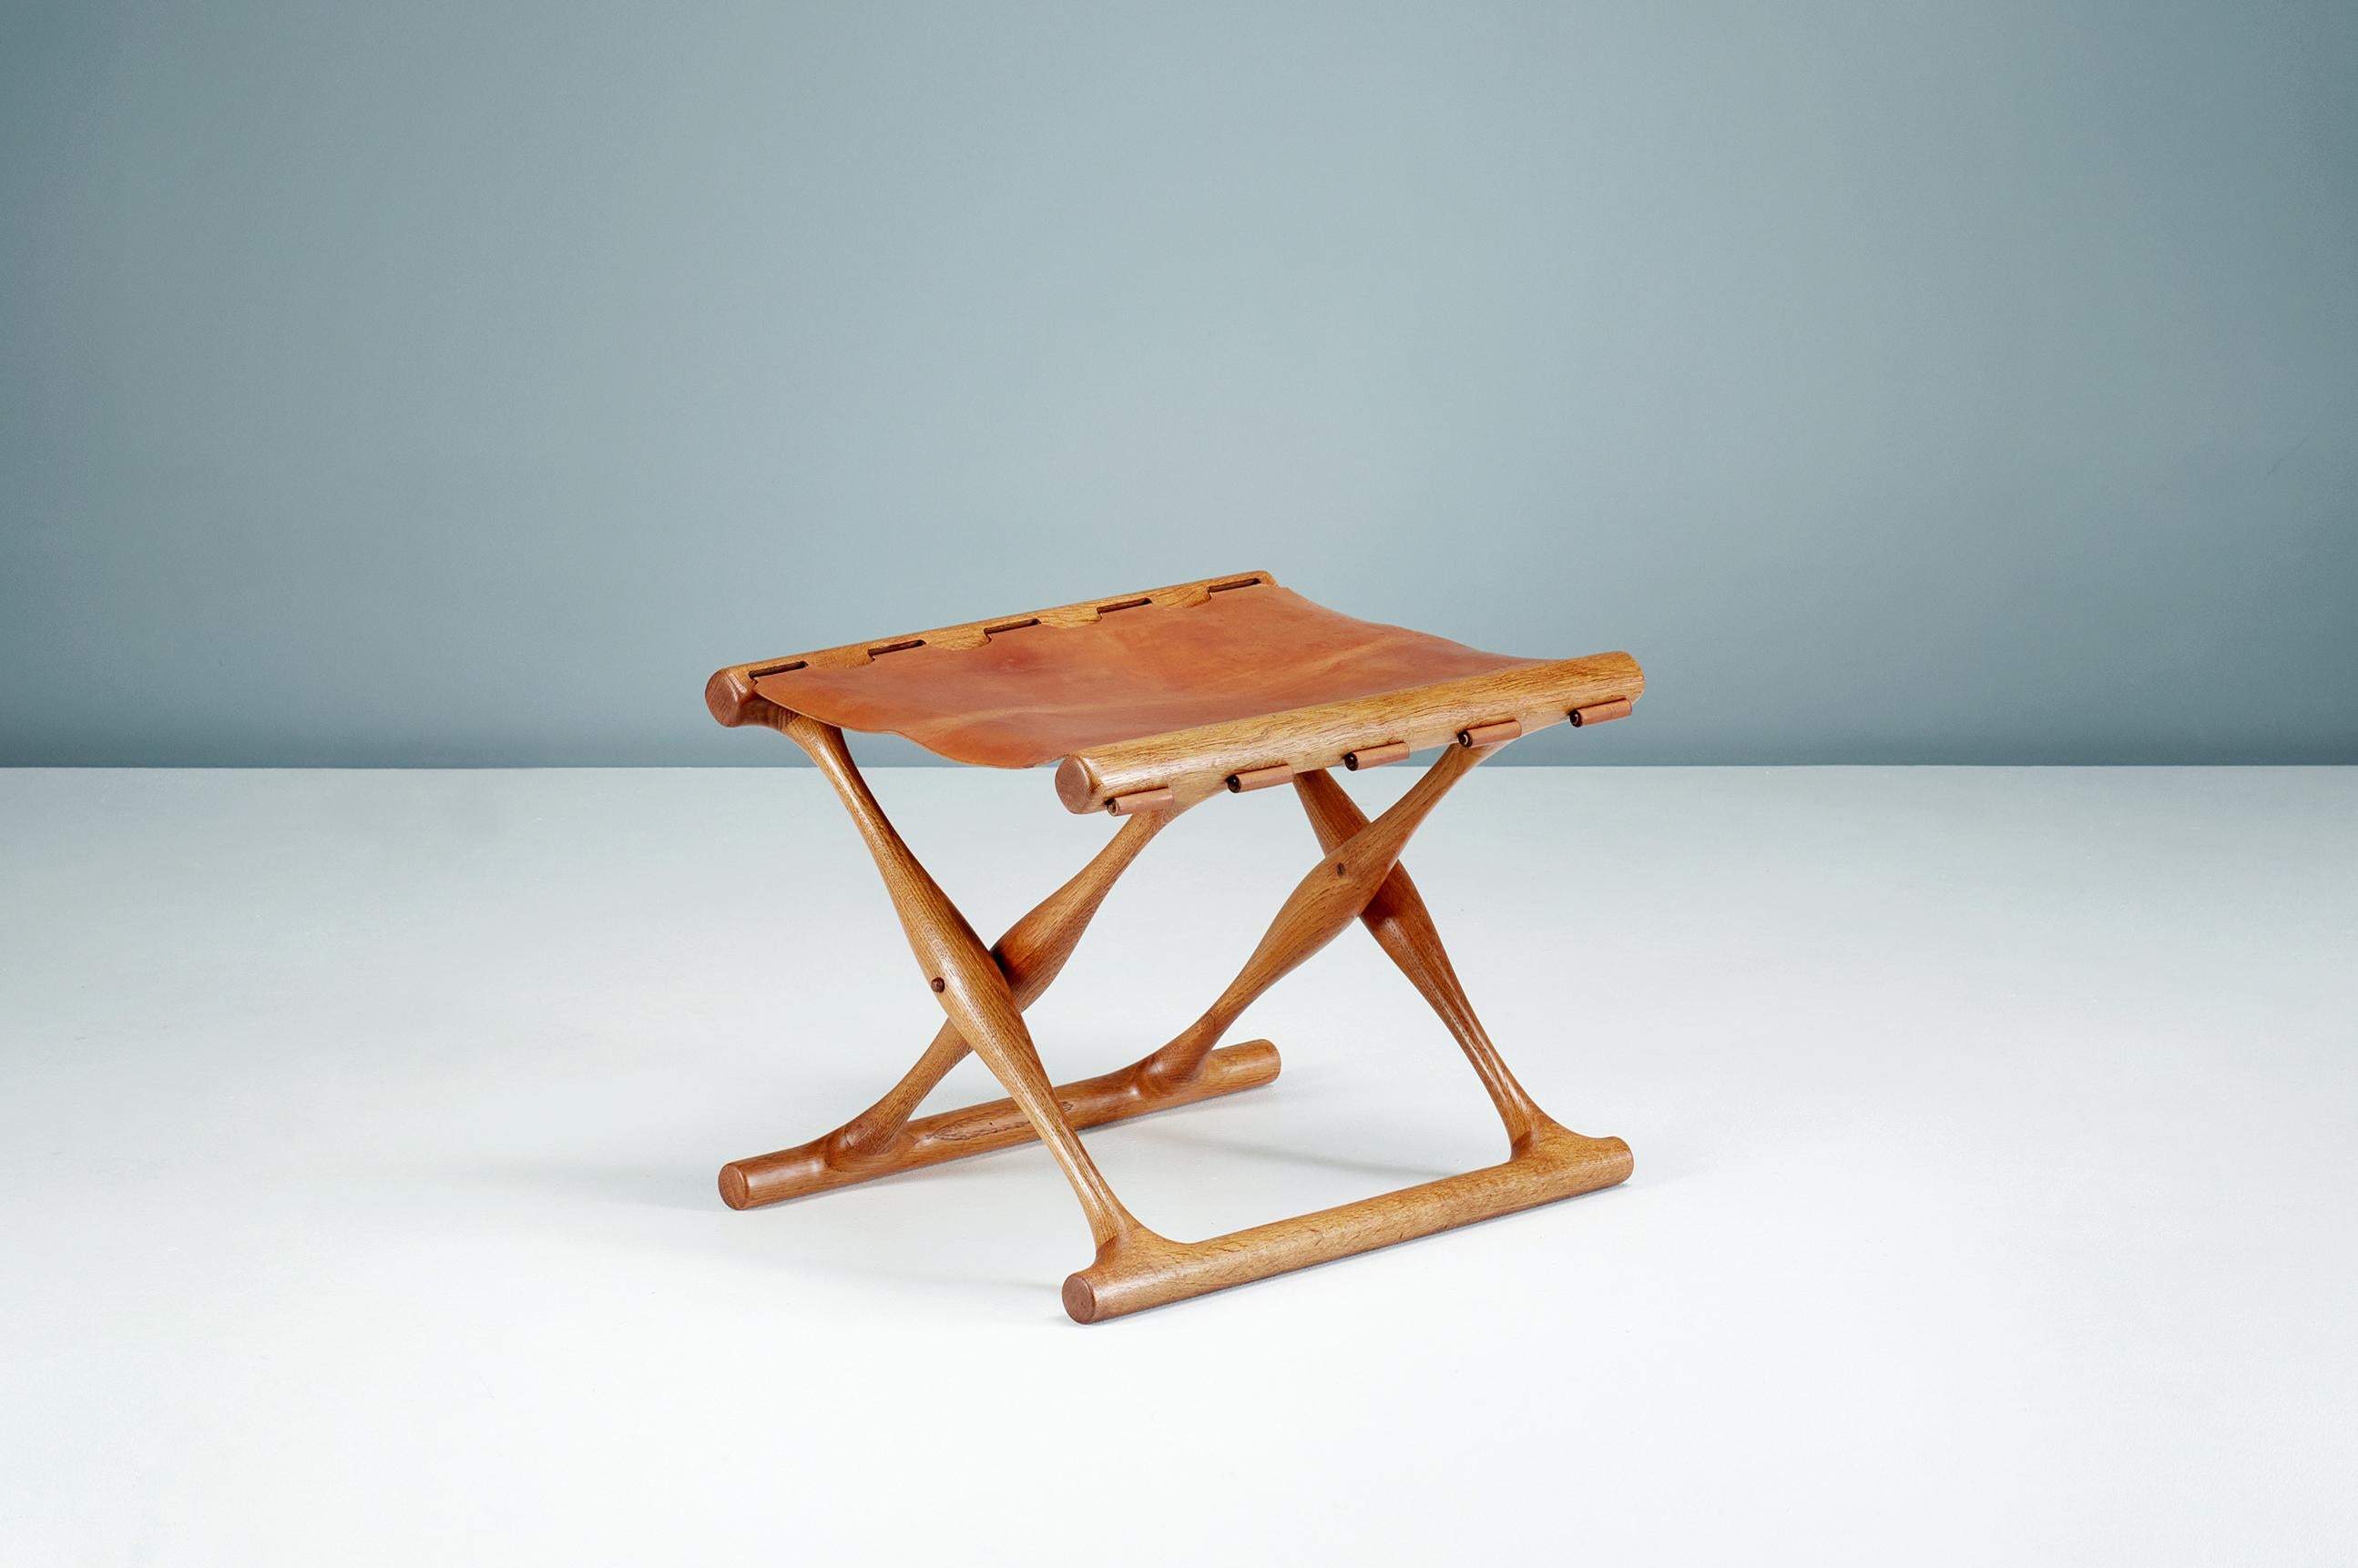 Poul Hundevad - Guldhoj Folding Stool, 1948

The iconic model 41 folding stool in beautifully aged Danish oak with original, patinated cognac brown saddle leather seat. The Guldhoj stool was designed as a replica of a Bronze Age artefact found in